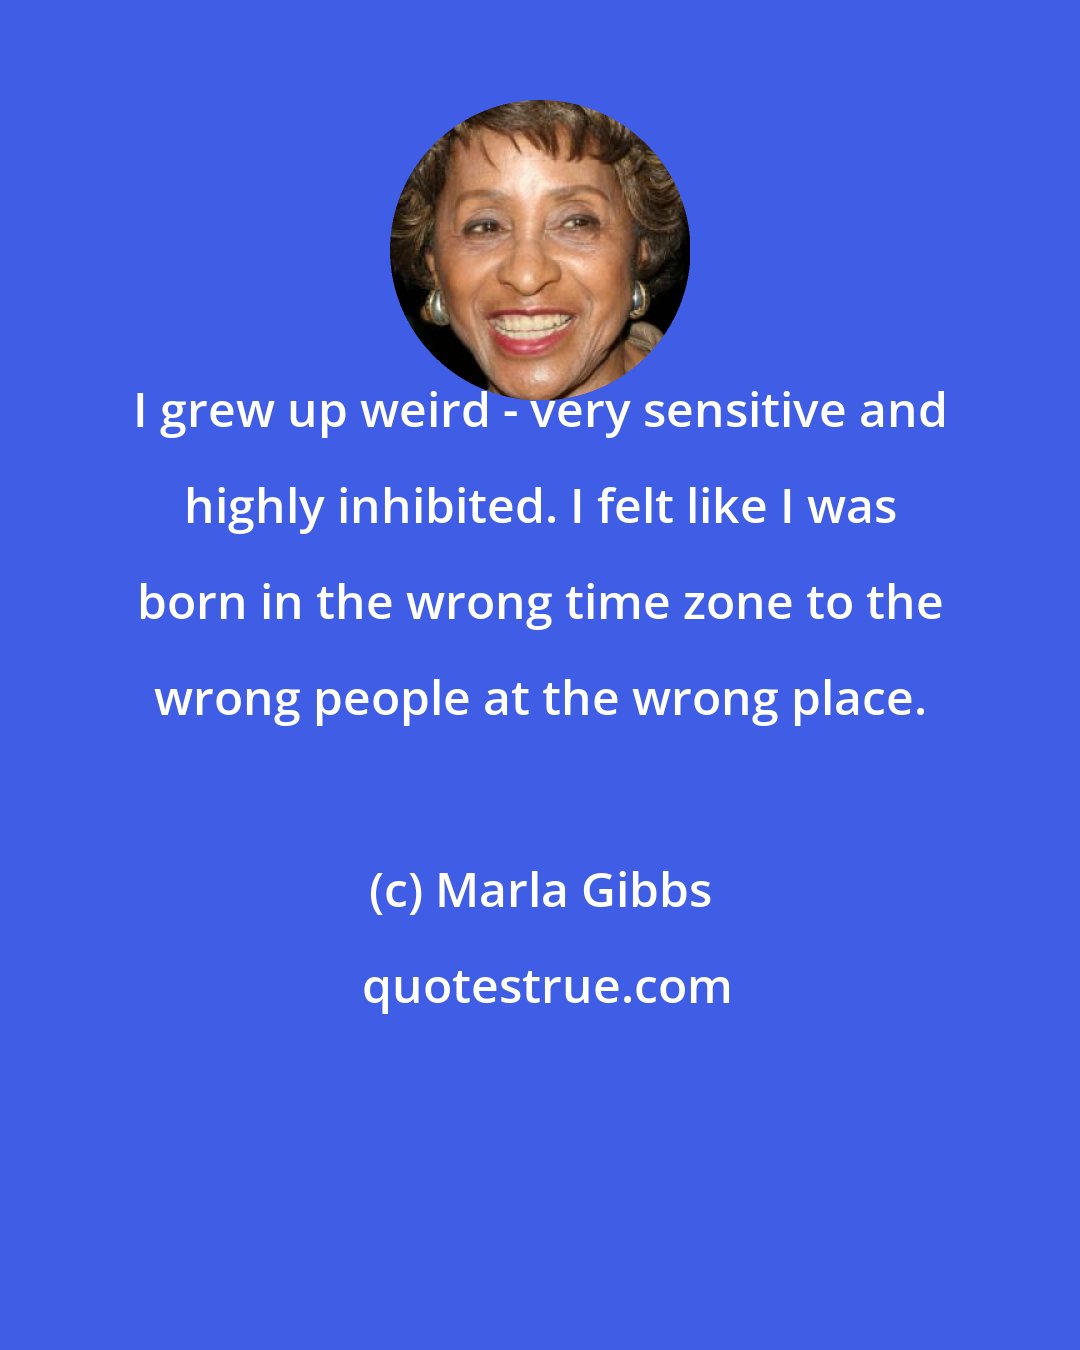 Marla Gibbs: I grew up weird - very sensitive and highly inhibited. I felt like I was born in the wrong time zone to the wrong people at the wrong place.